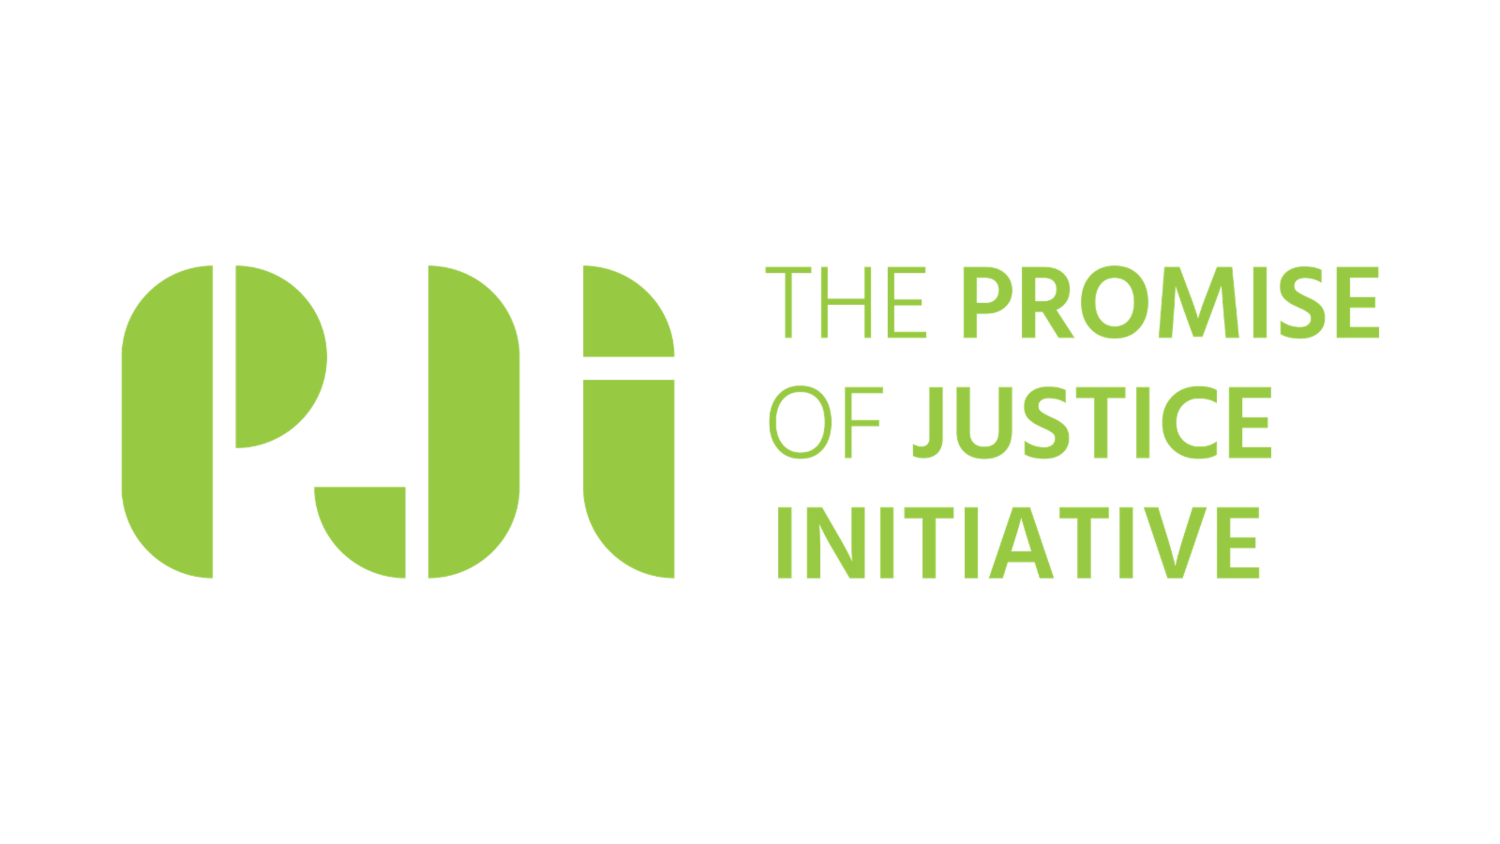 The Promise of Justice Initiative